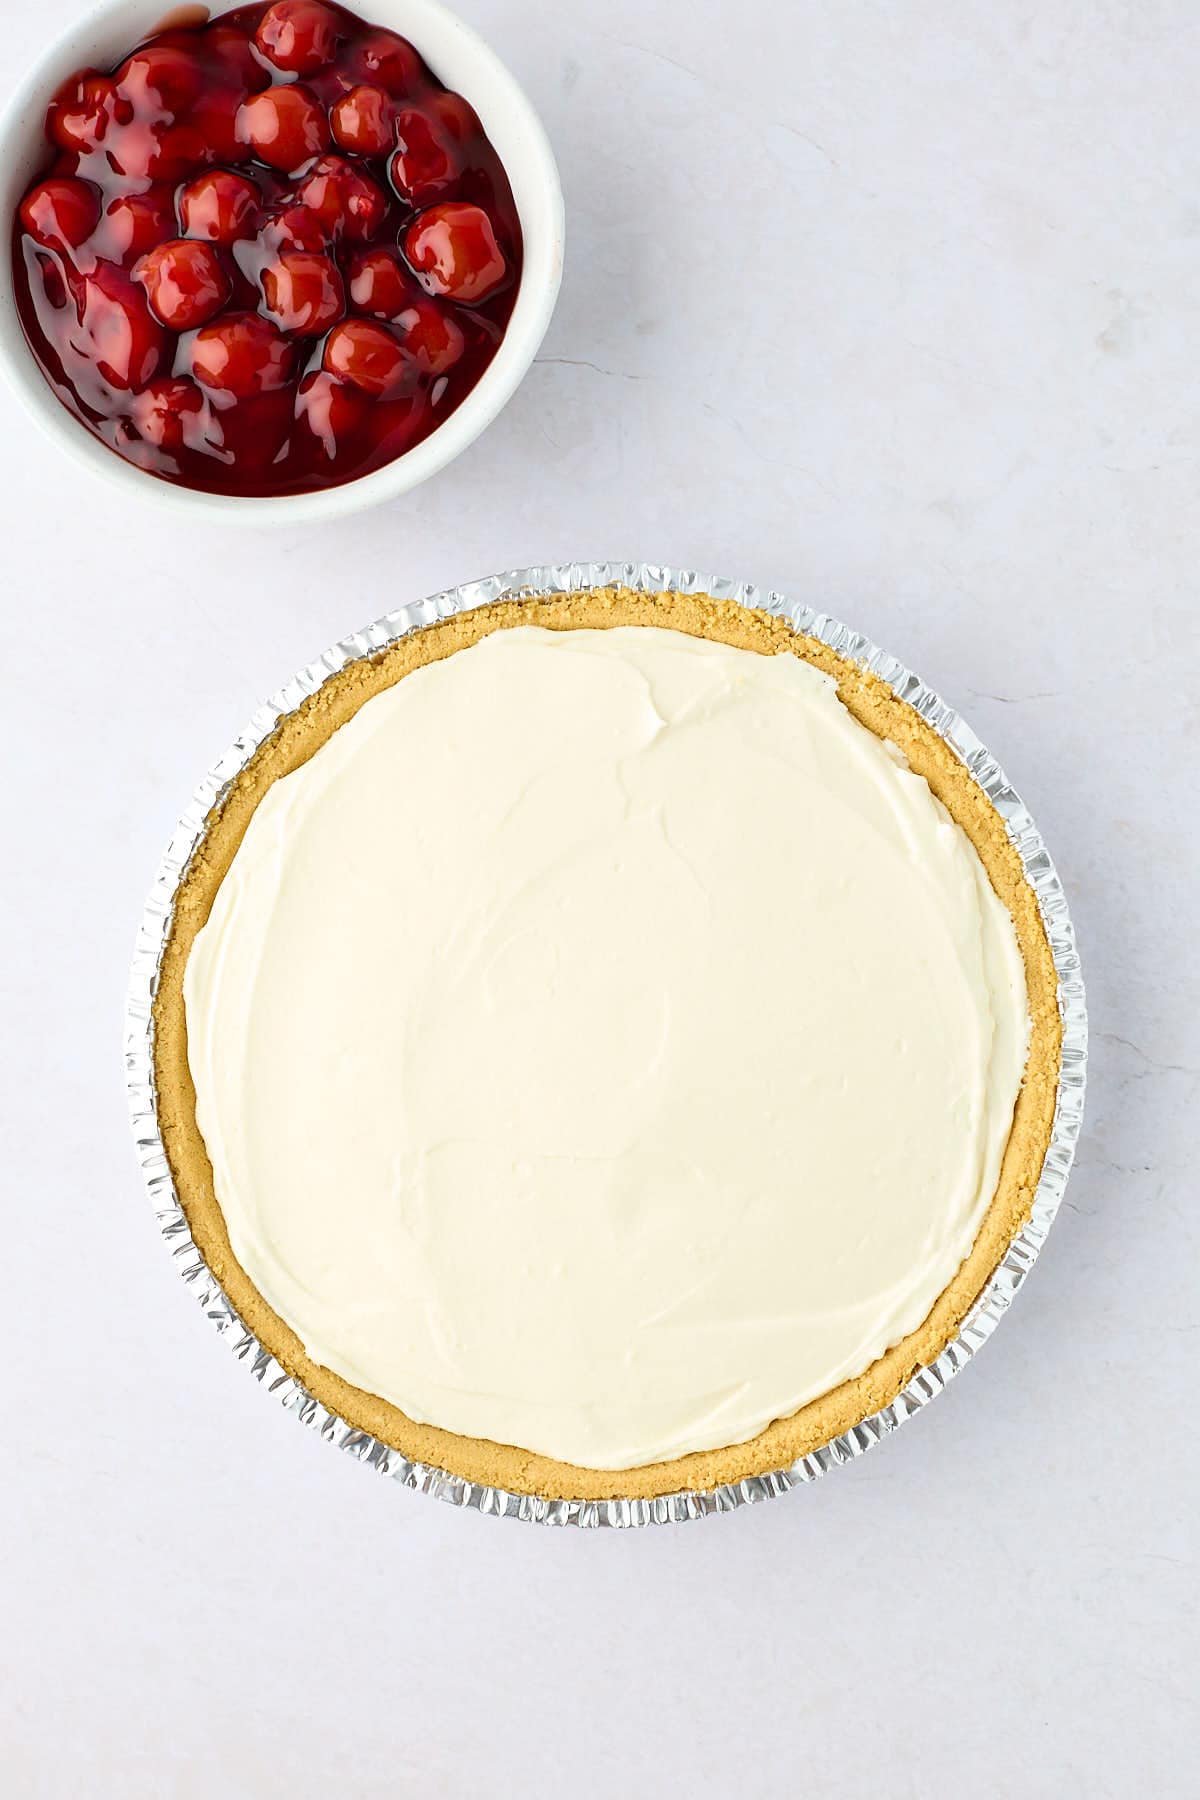 Cream cheese filling in a graham cracker pie crust with a bowl of cherry pie filling next to it.